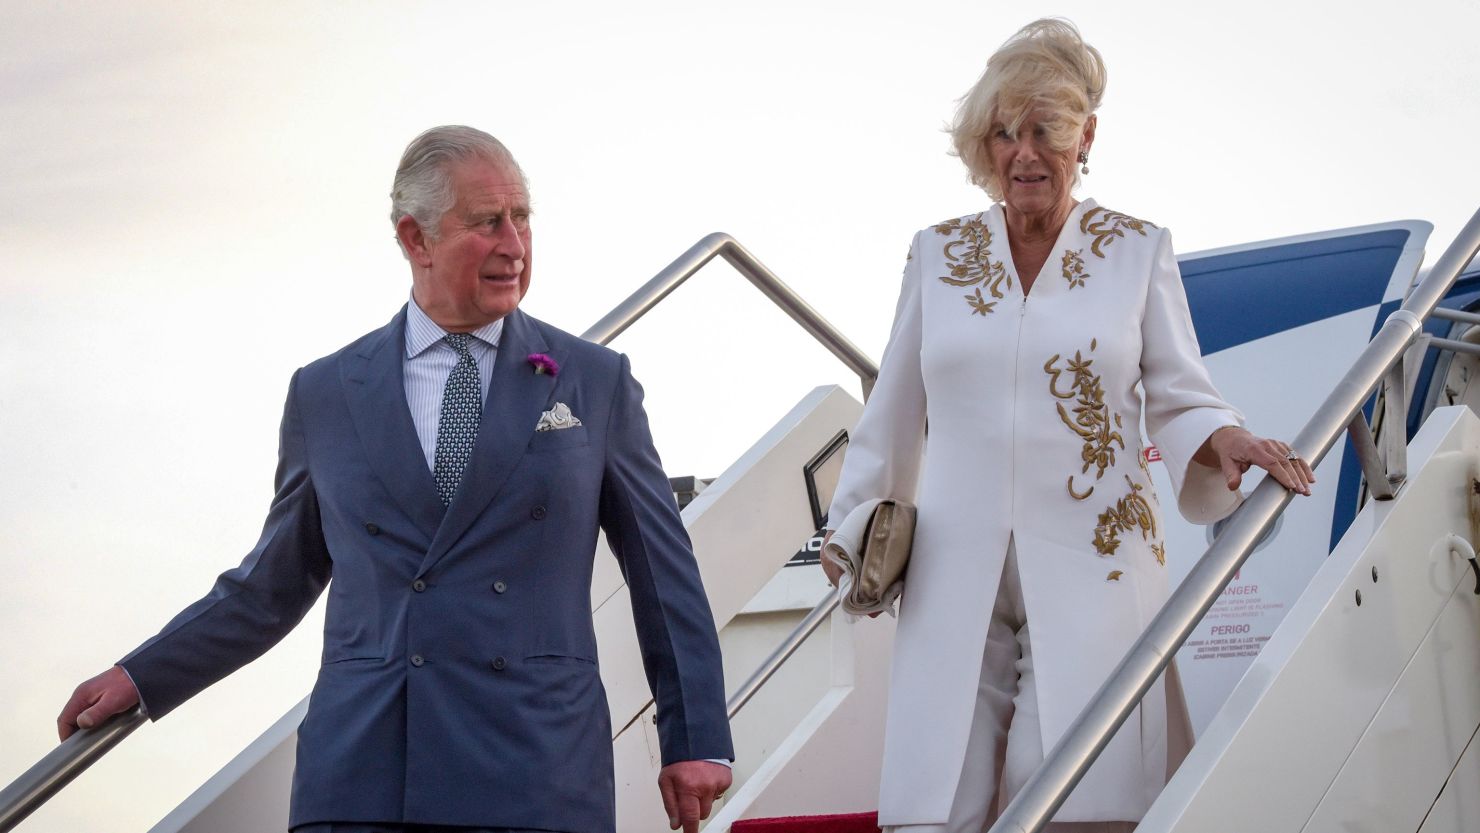 Most overseas visits were carried out by Prince Charles and his wife Camilla, the Duchess of Cornwall.